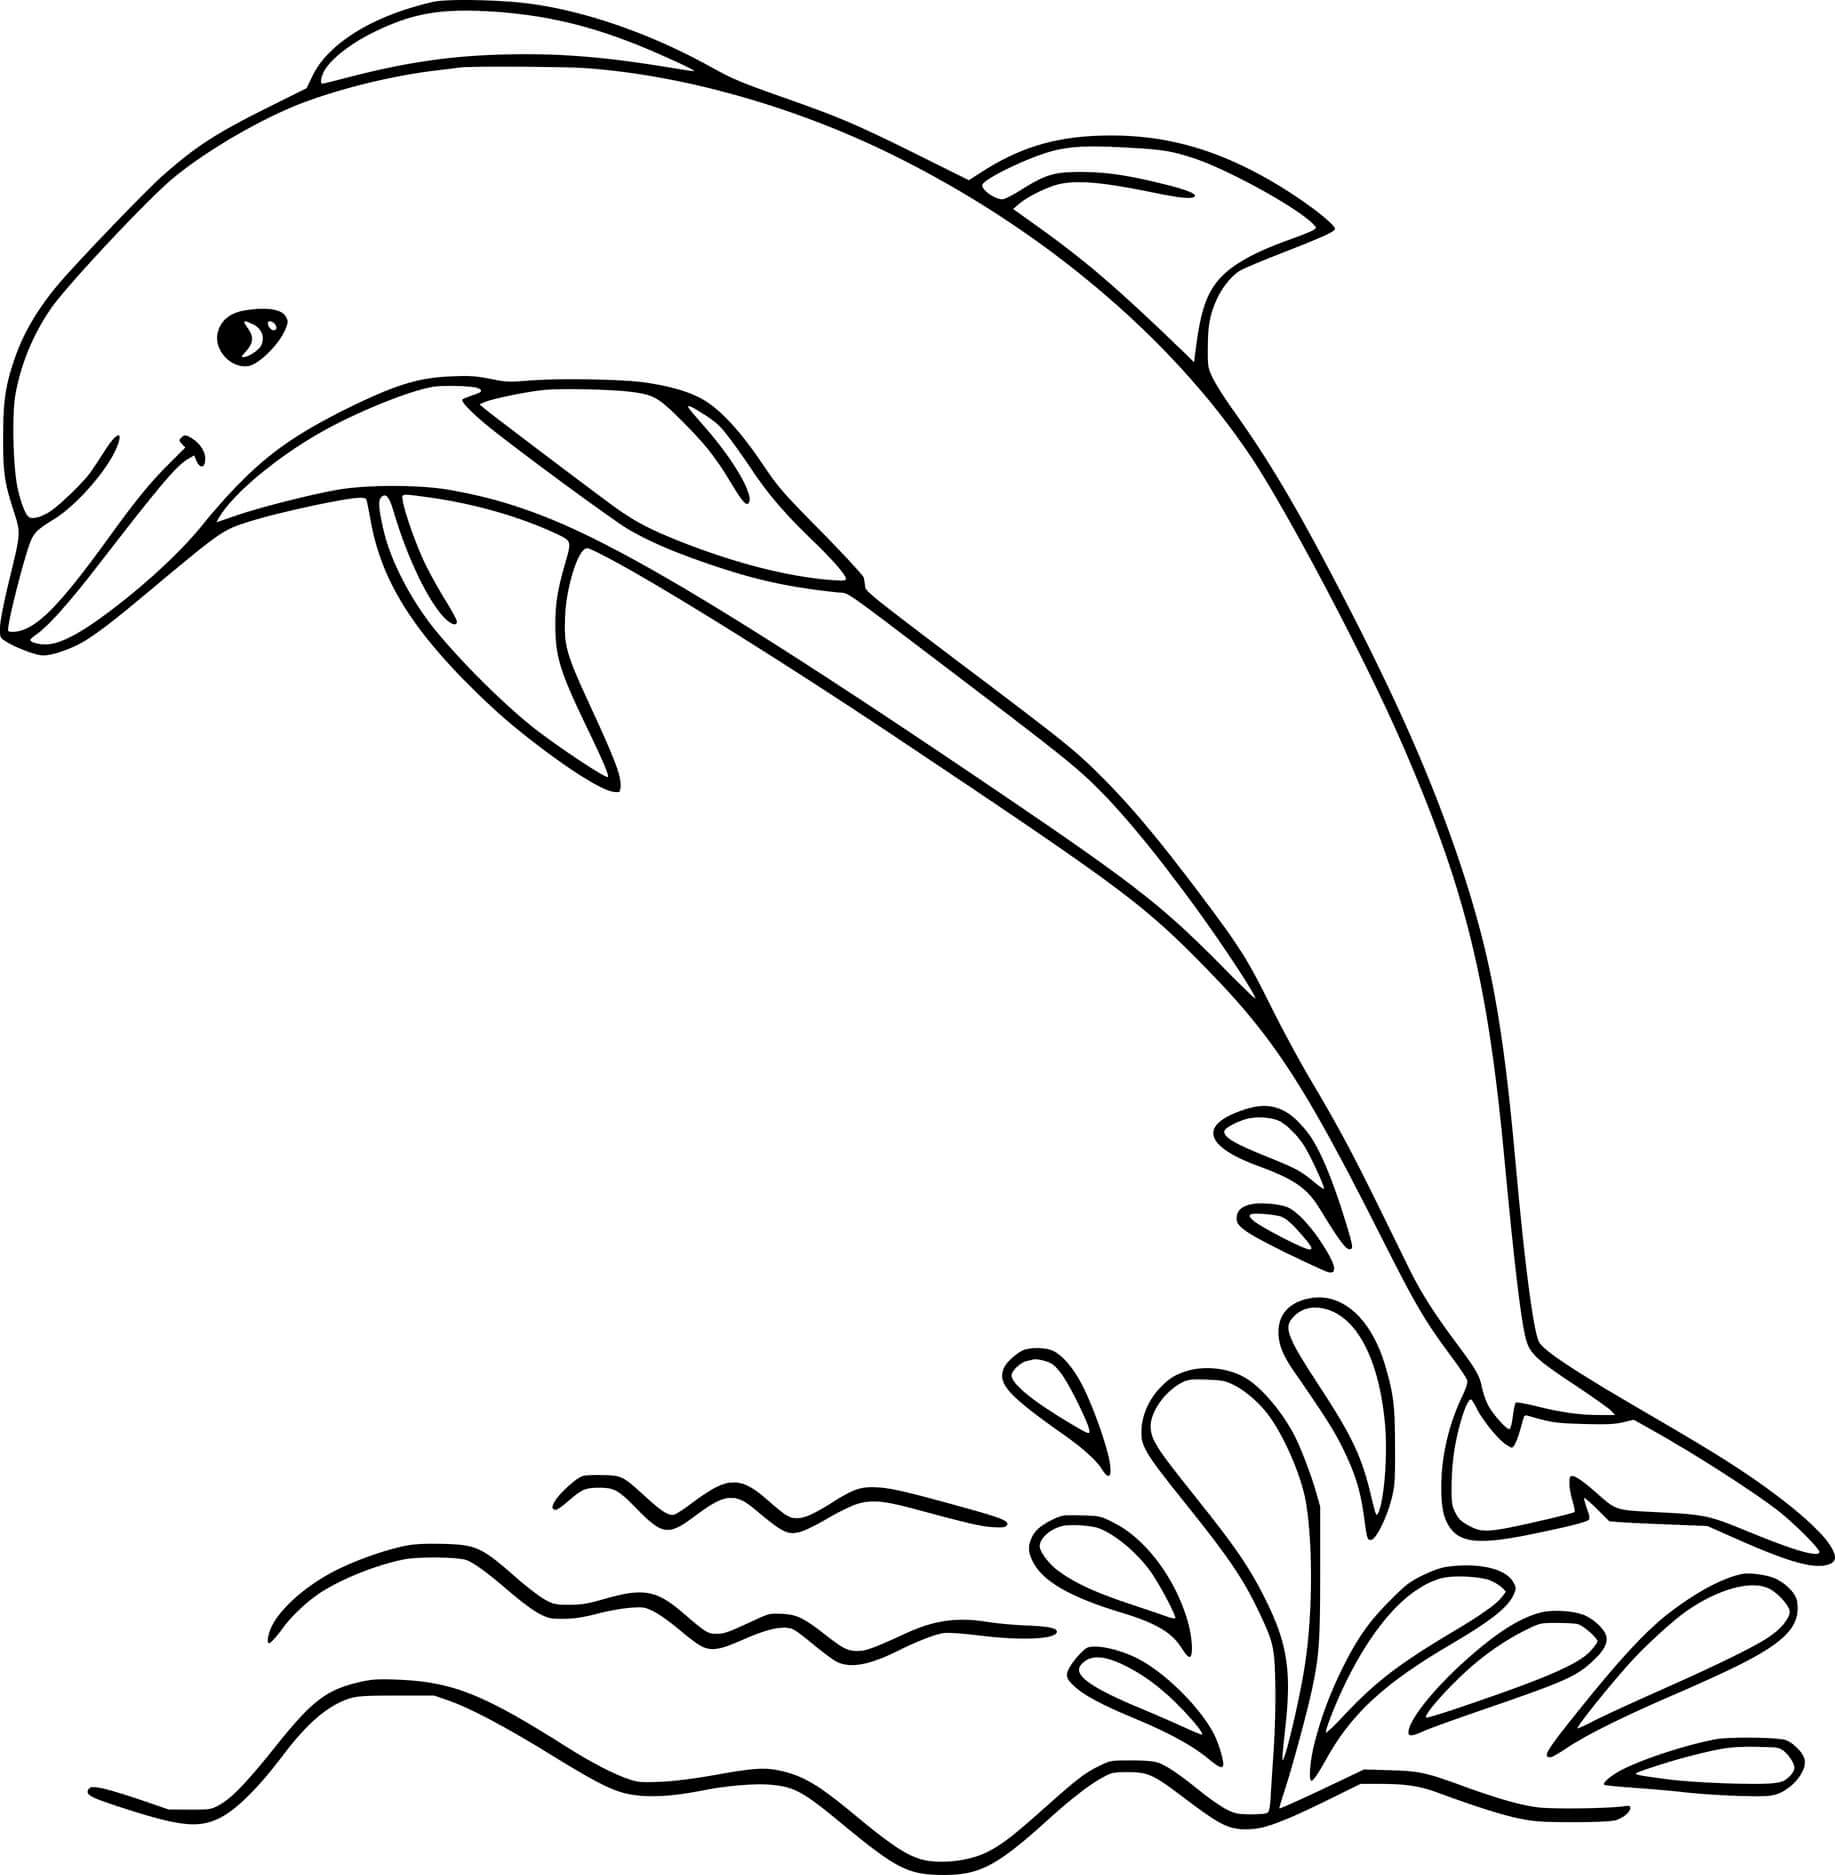 Gorgeous Dolphin Coloring Pages - Coloring Cool